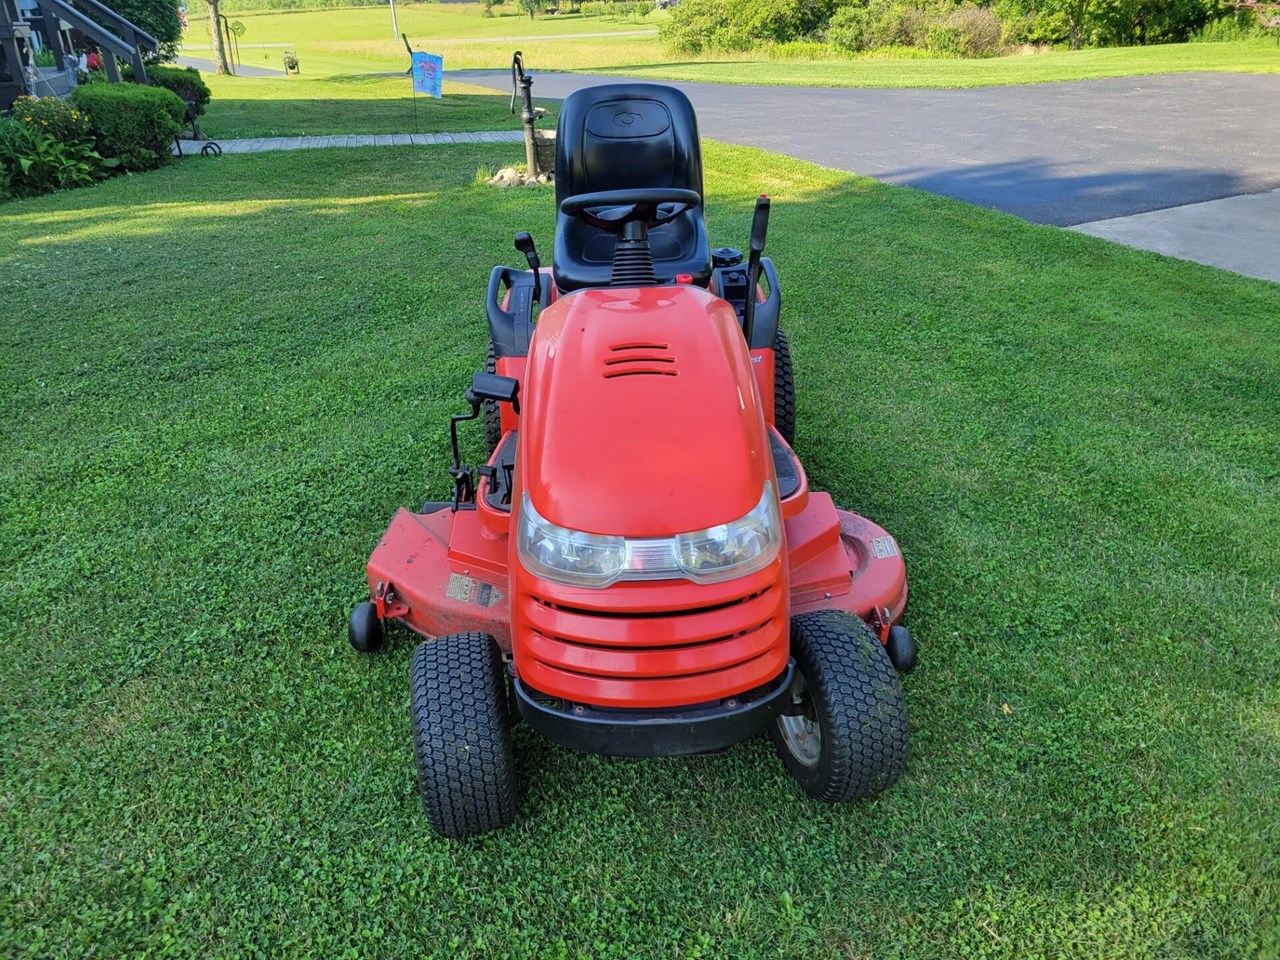 2007 Simplicity Conquest 23 Lawn Mower For Sale